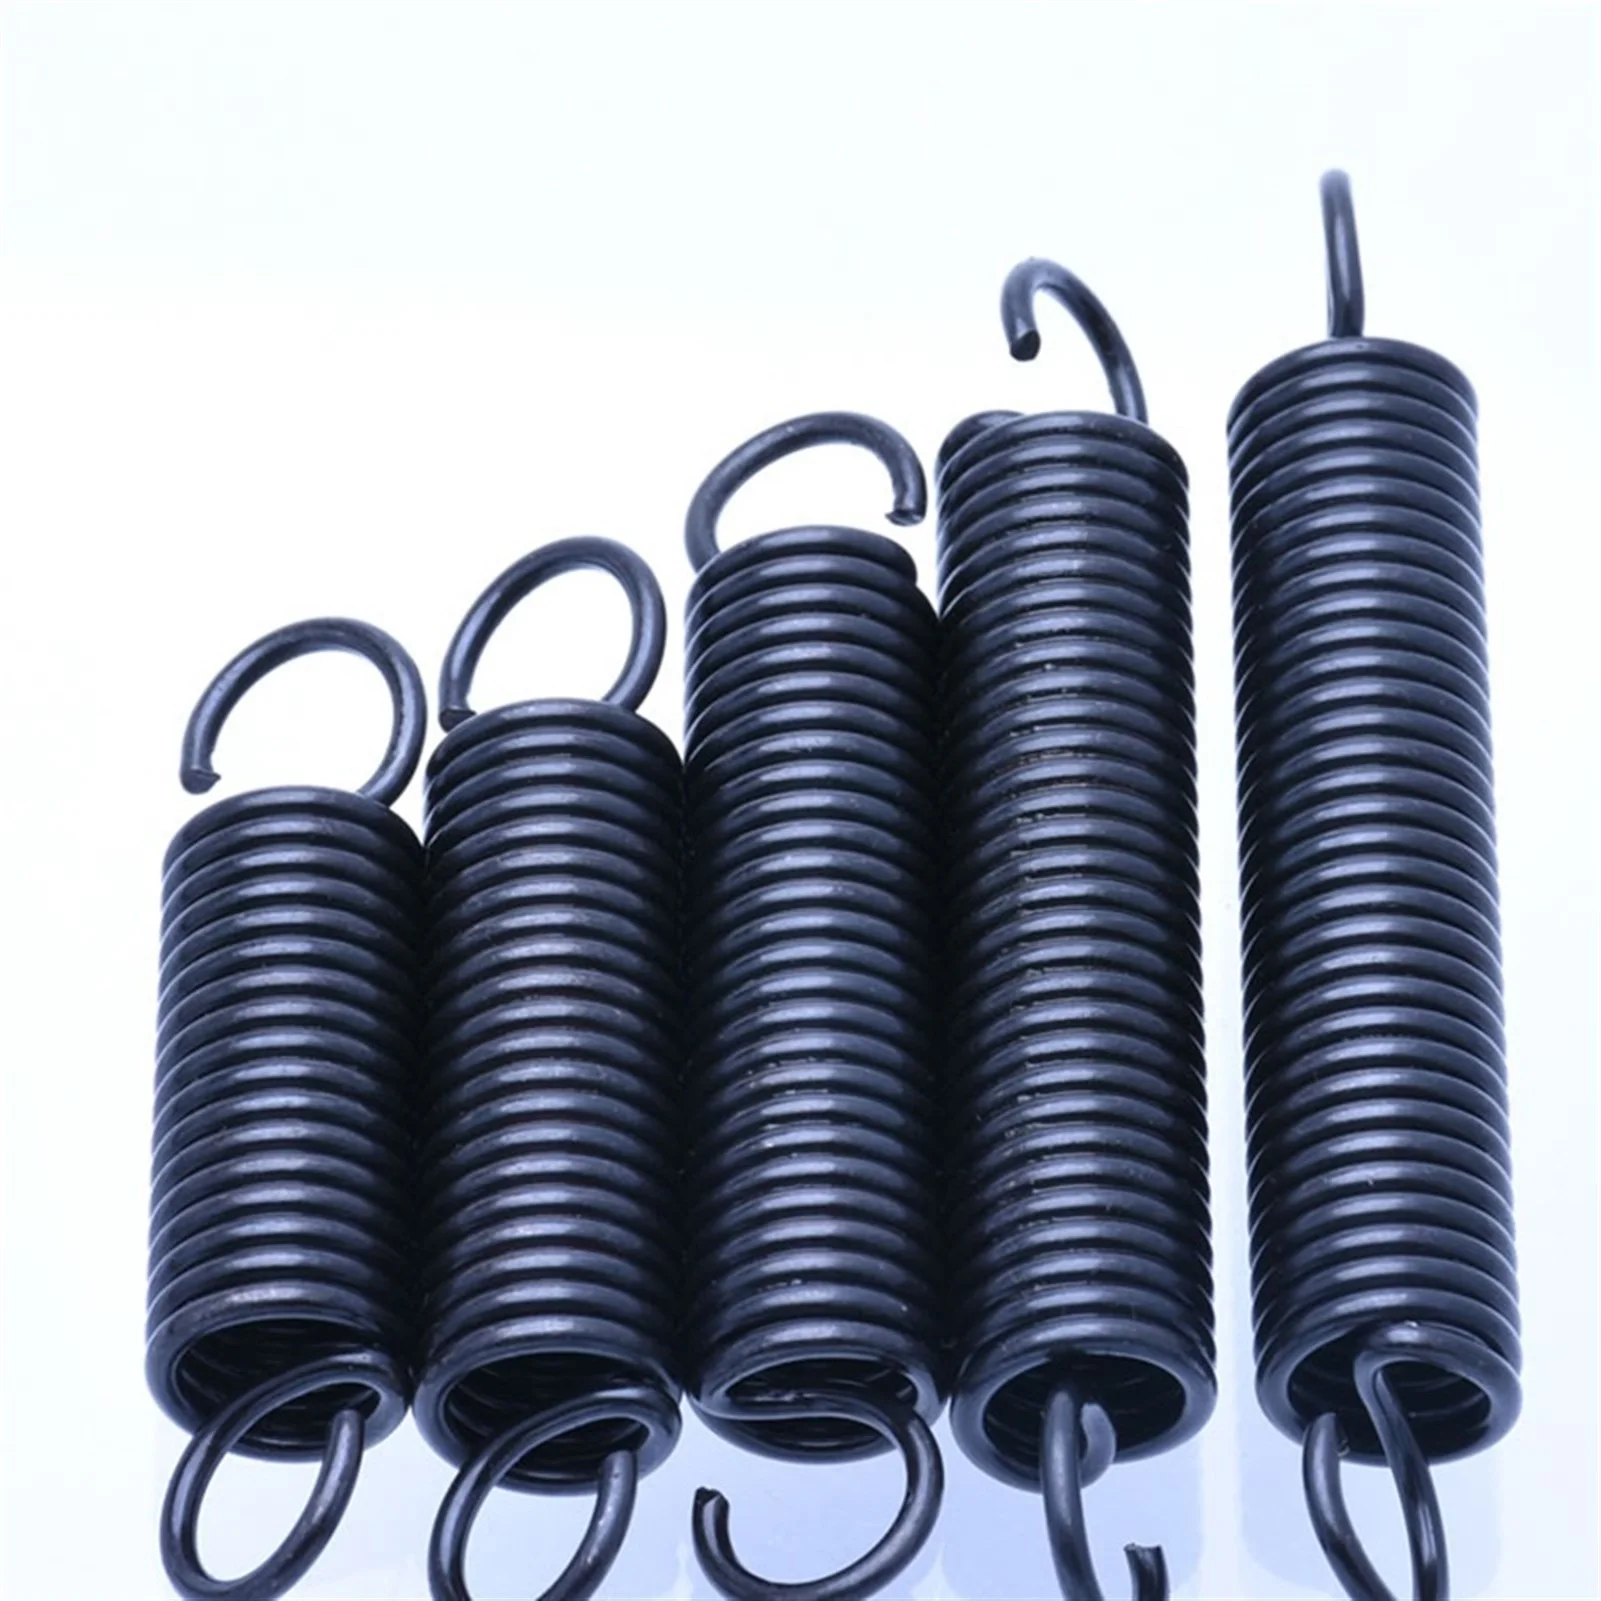 

Steel Tension Spring, 10Pcs, With Hooks Small Extension Spring, Outer Diameter 4mm Wire Diameter 0.5mm Length 15-60mm